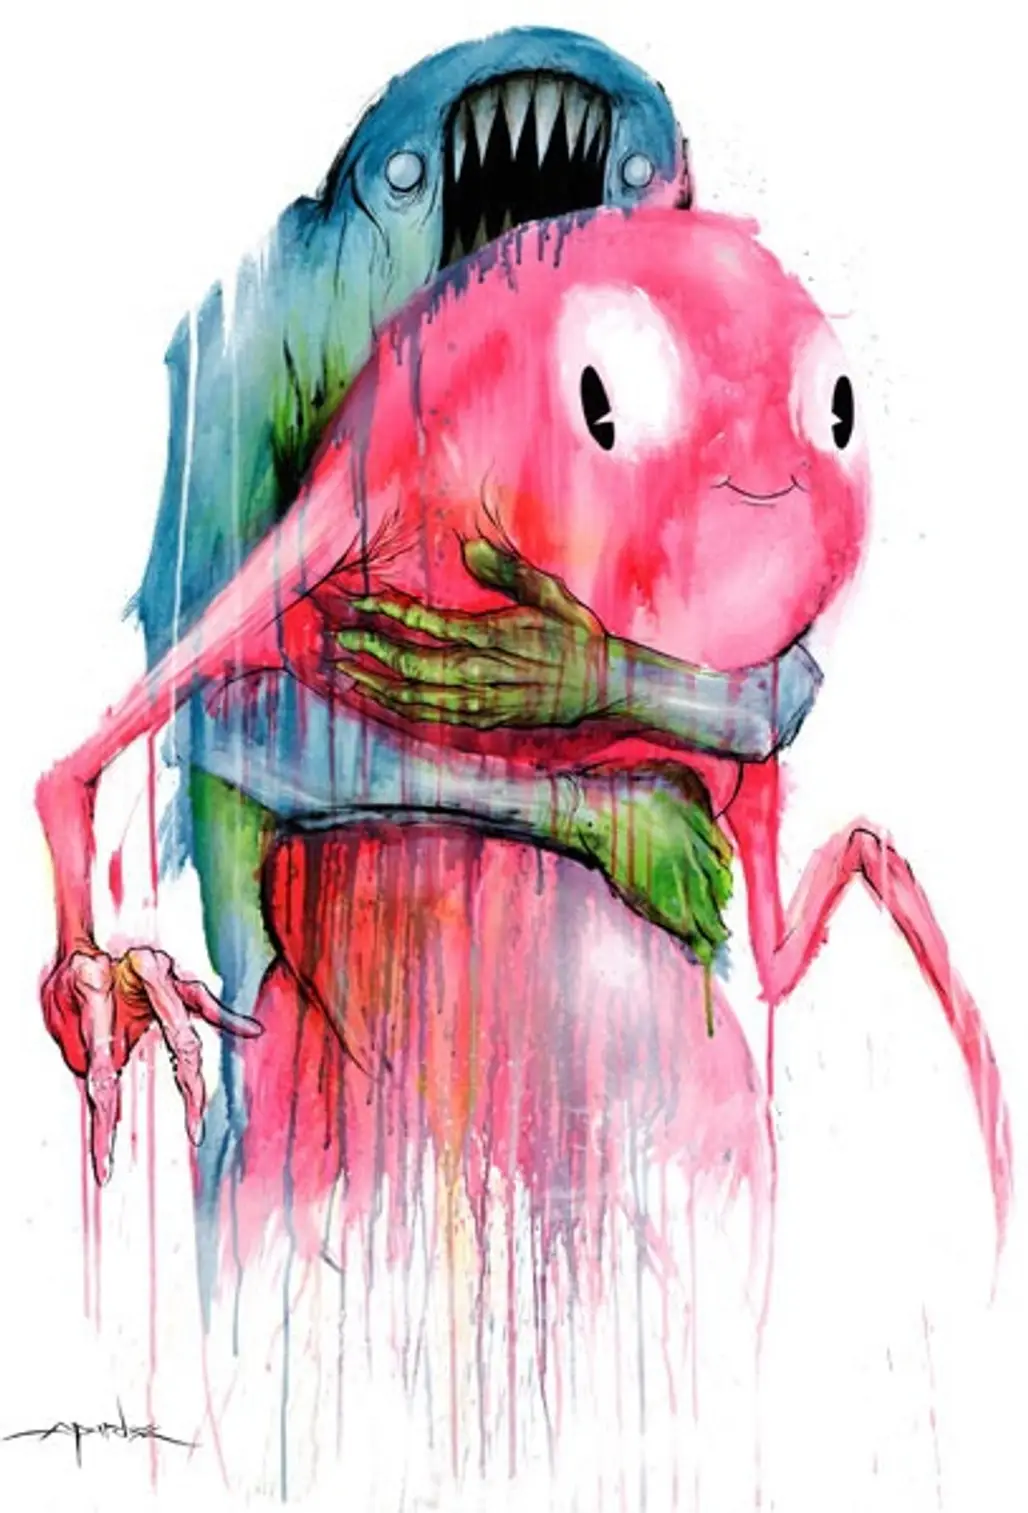 The Backpack by Alex Pardee